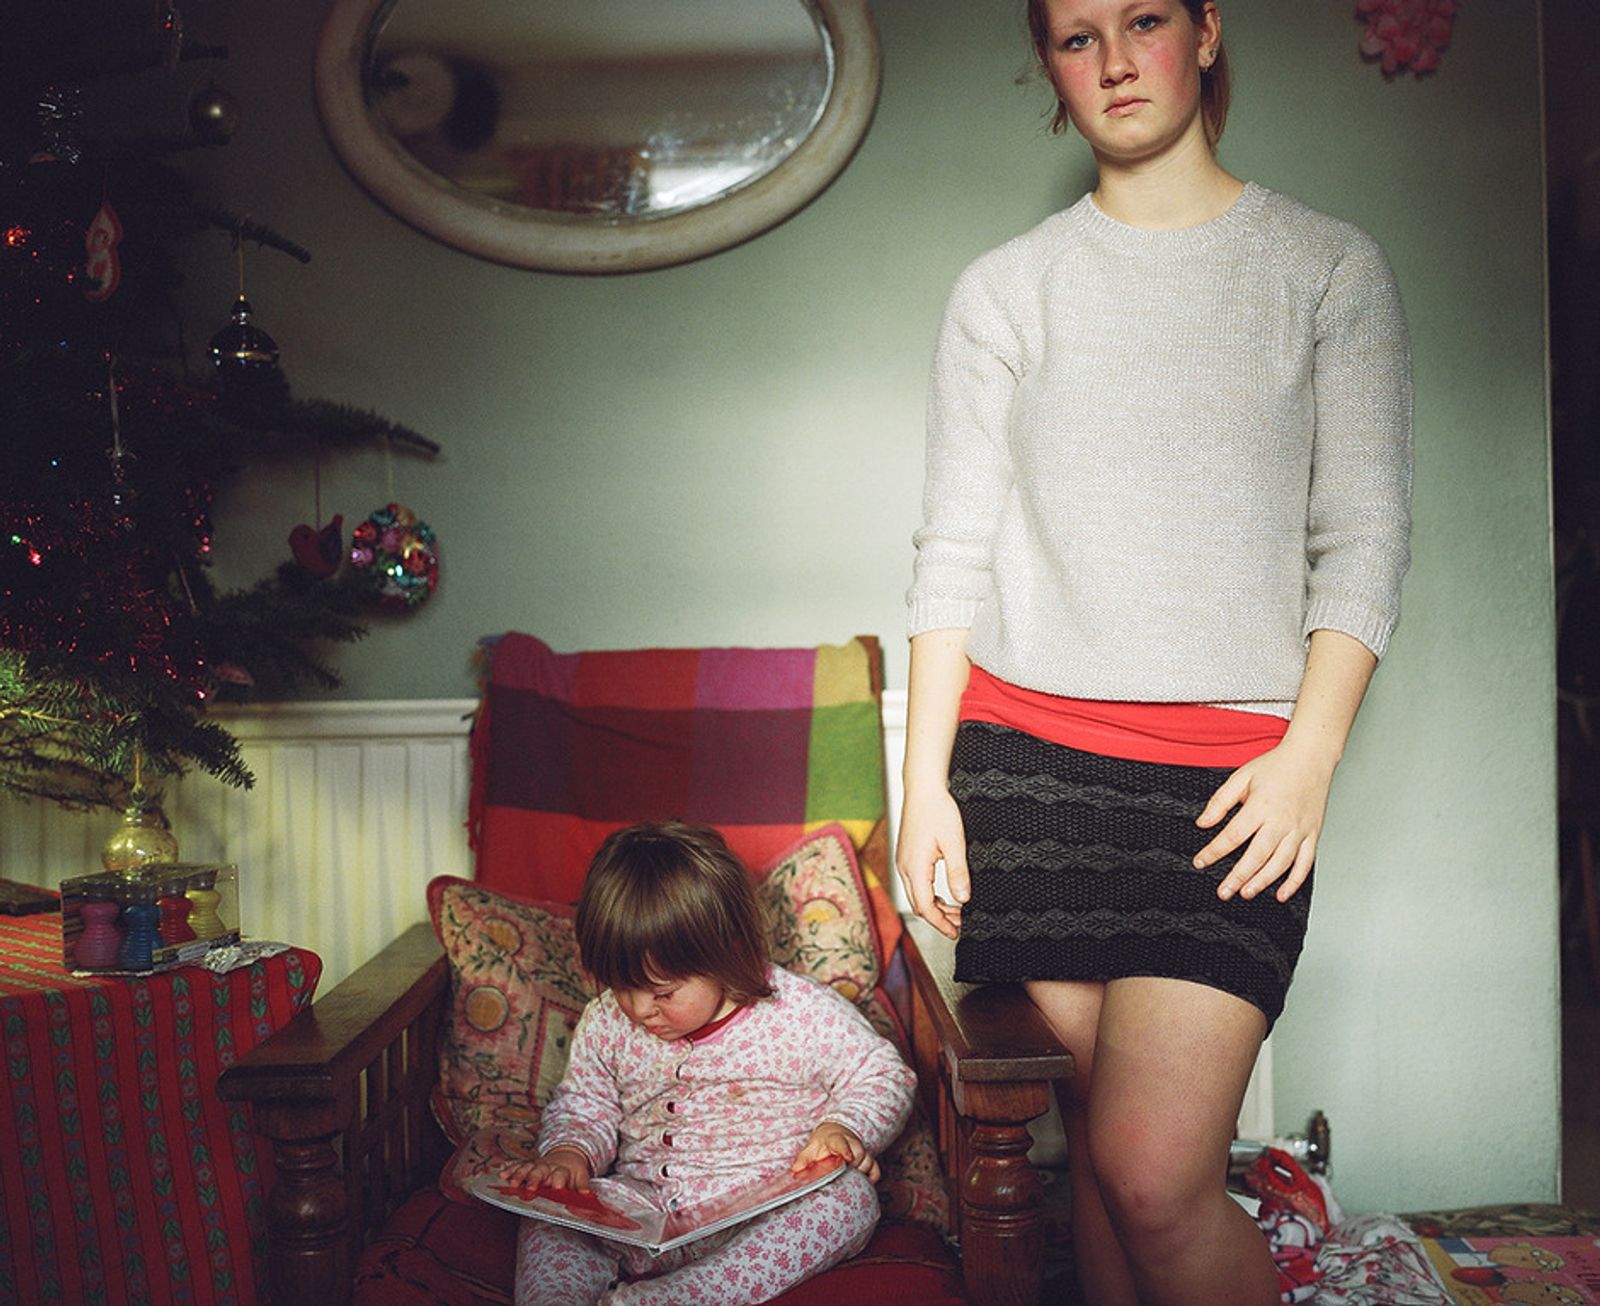 © Sian Davey - Image from the Looking for Alice photography project